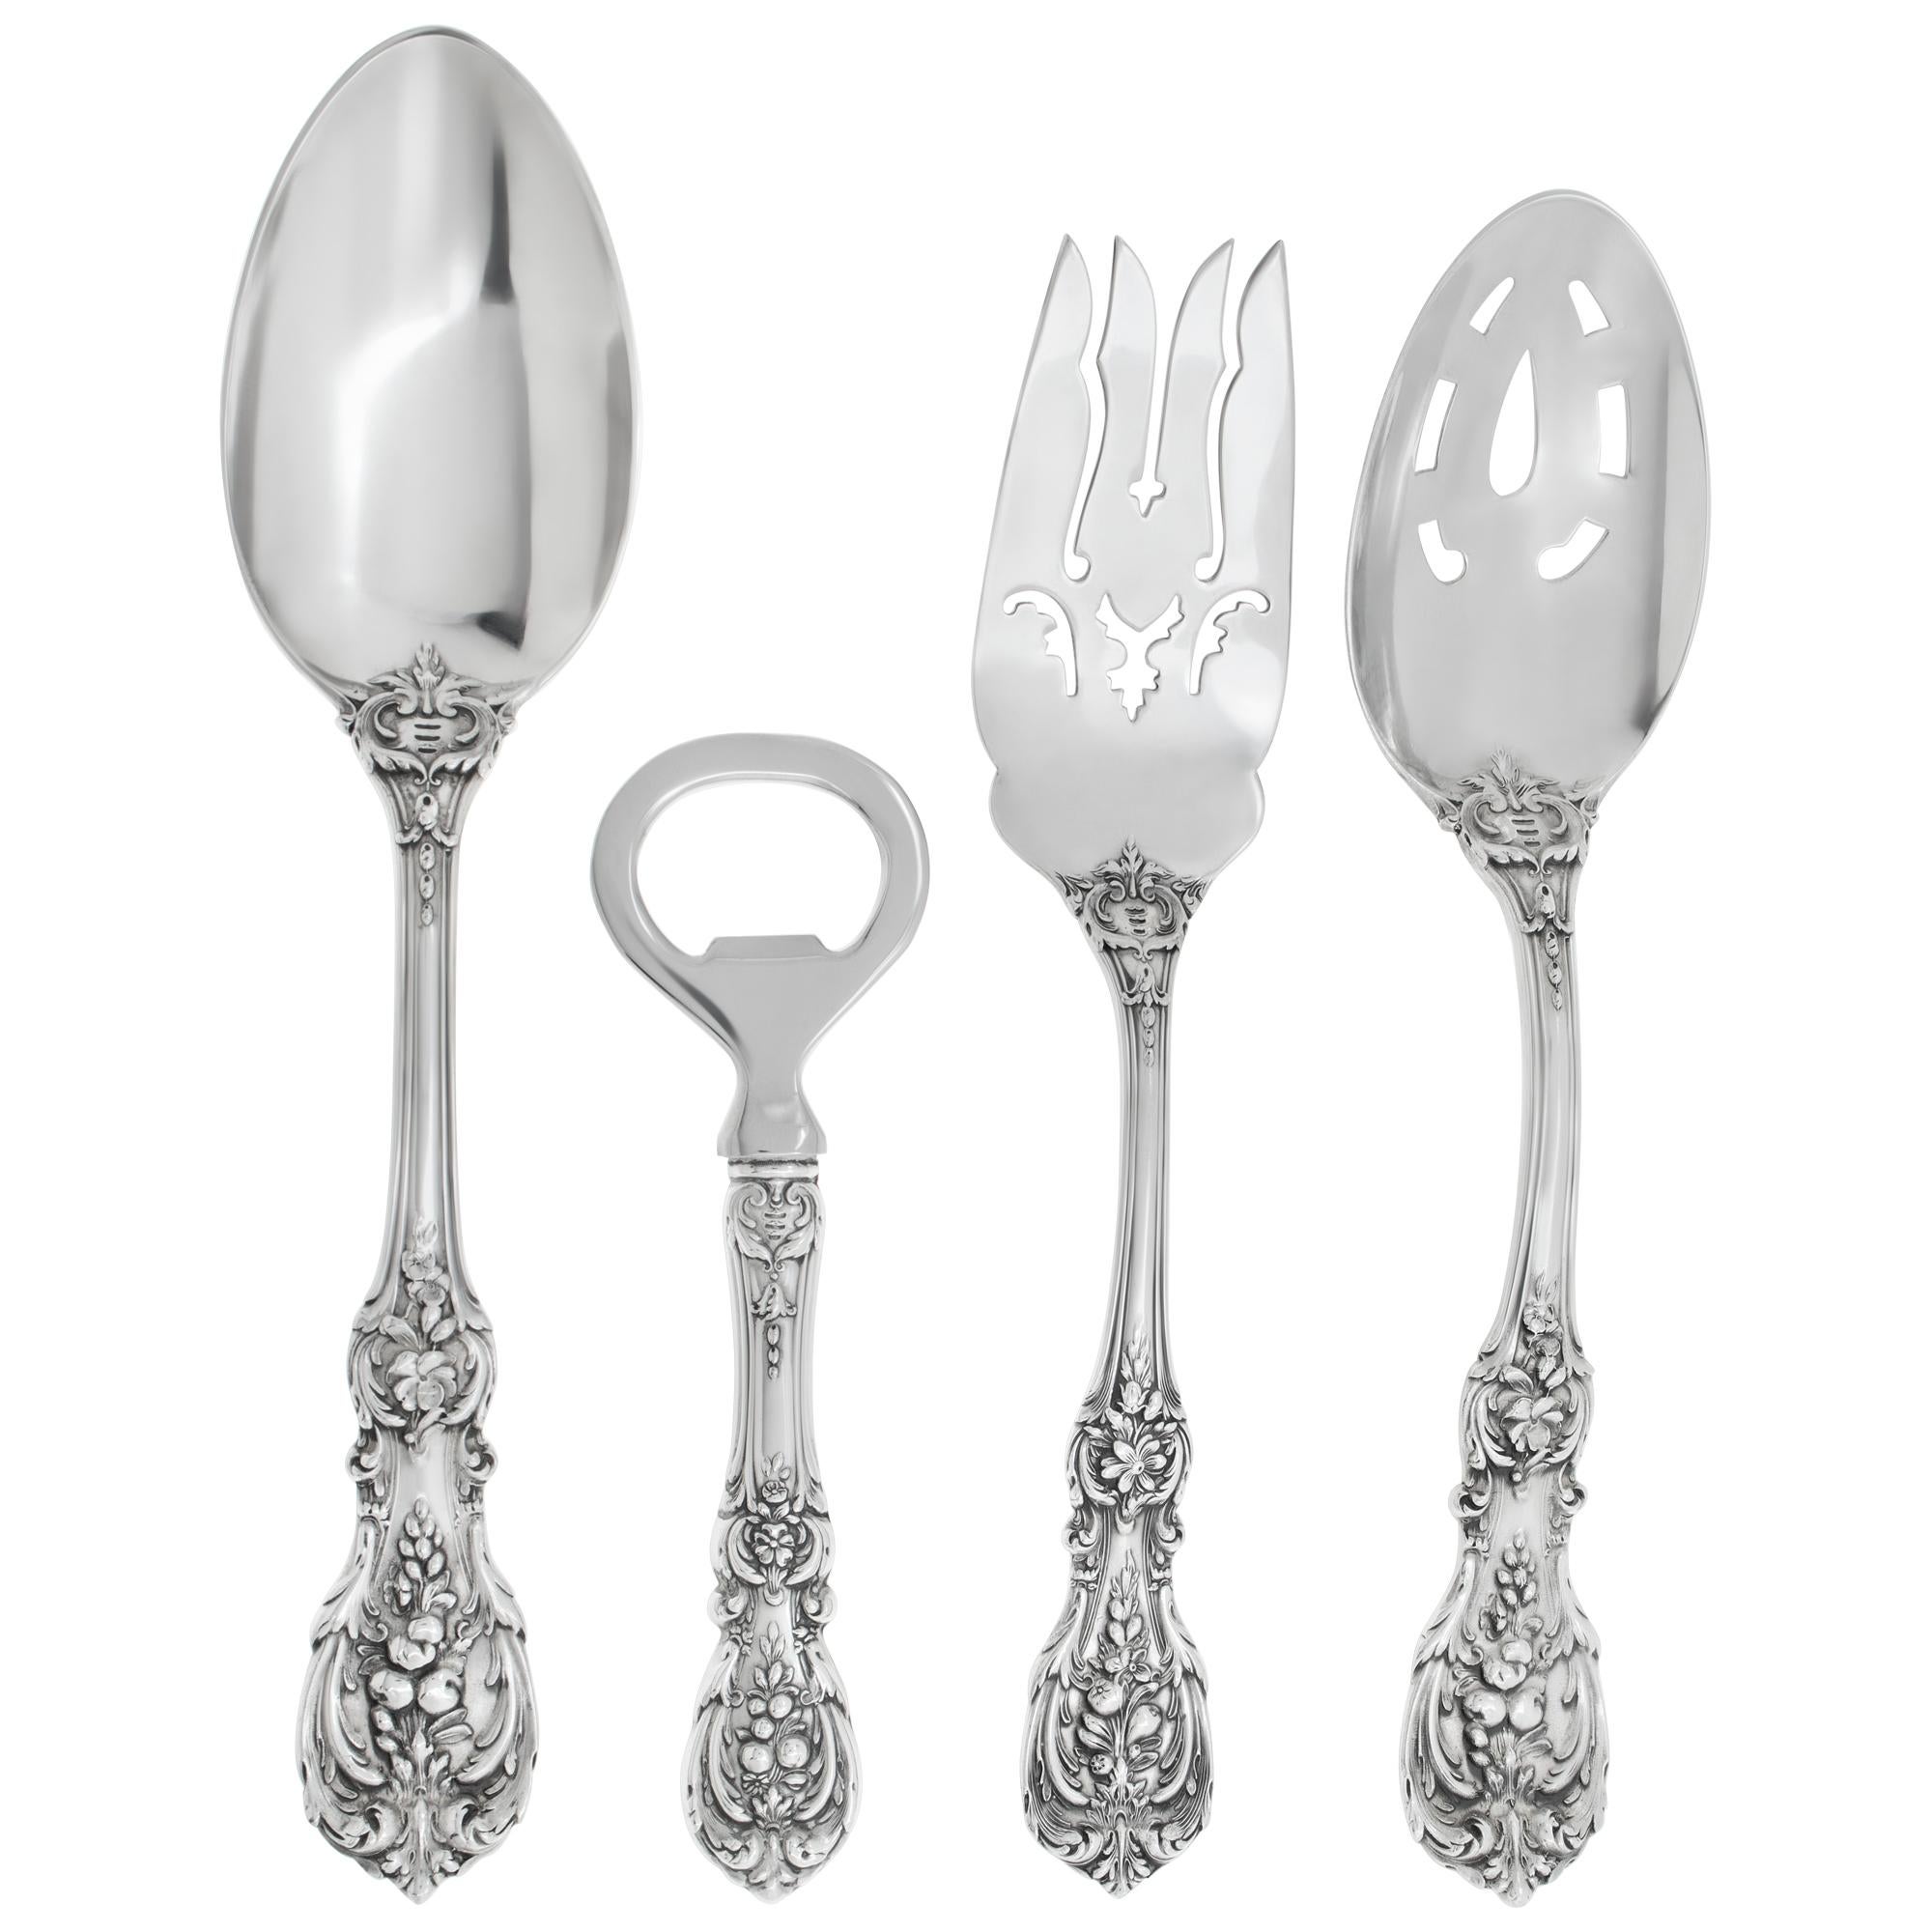 FRANCIS THE FIRST sterling silver flatware set patented in 1907 by Reed & Barton. 45 pieces- 5 place set for 6  + 4 serving pieces. Over 56 troys ounces of .925  sterling silver (counting the stainless steel knife as 1.00 troy ounce each, butter